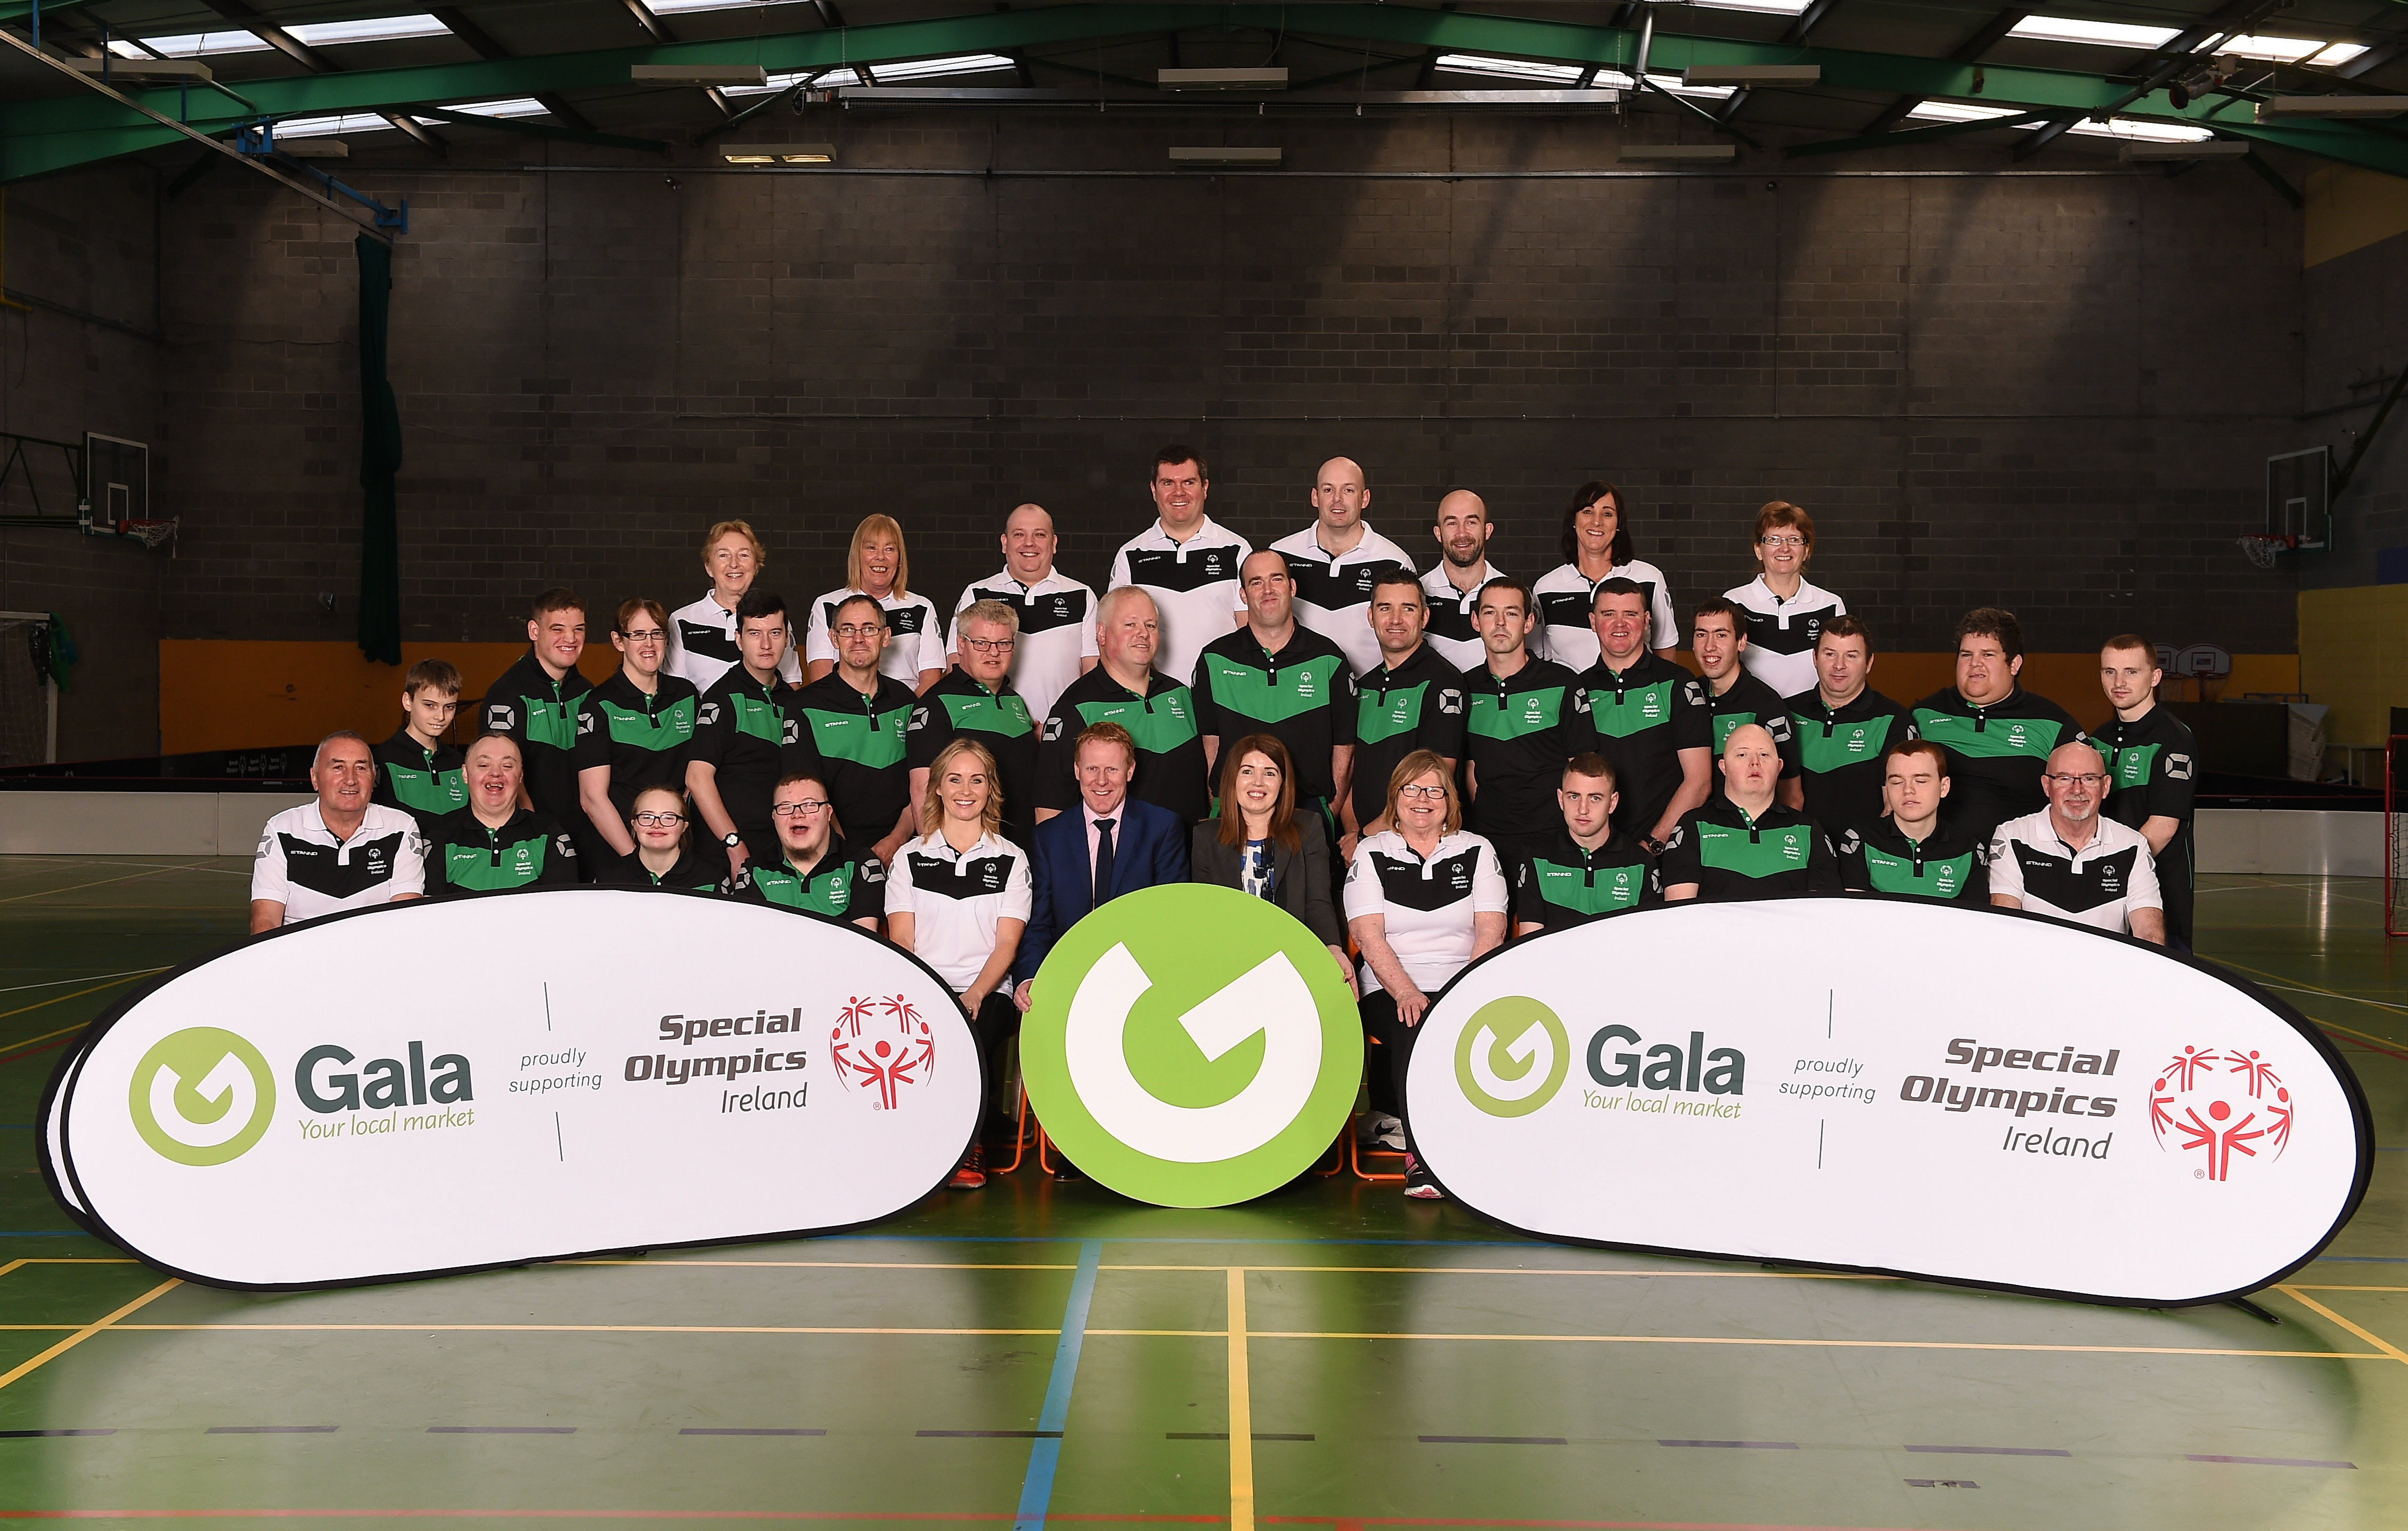 Gala joins Irish Special Olympics team for Winter Games squad reveal